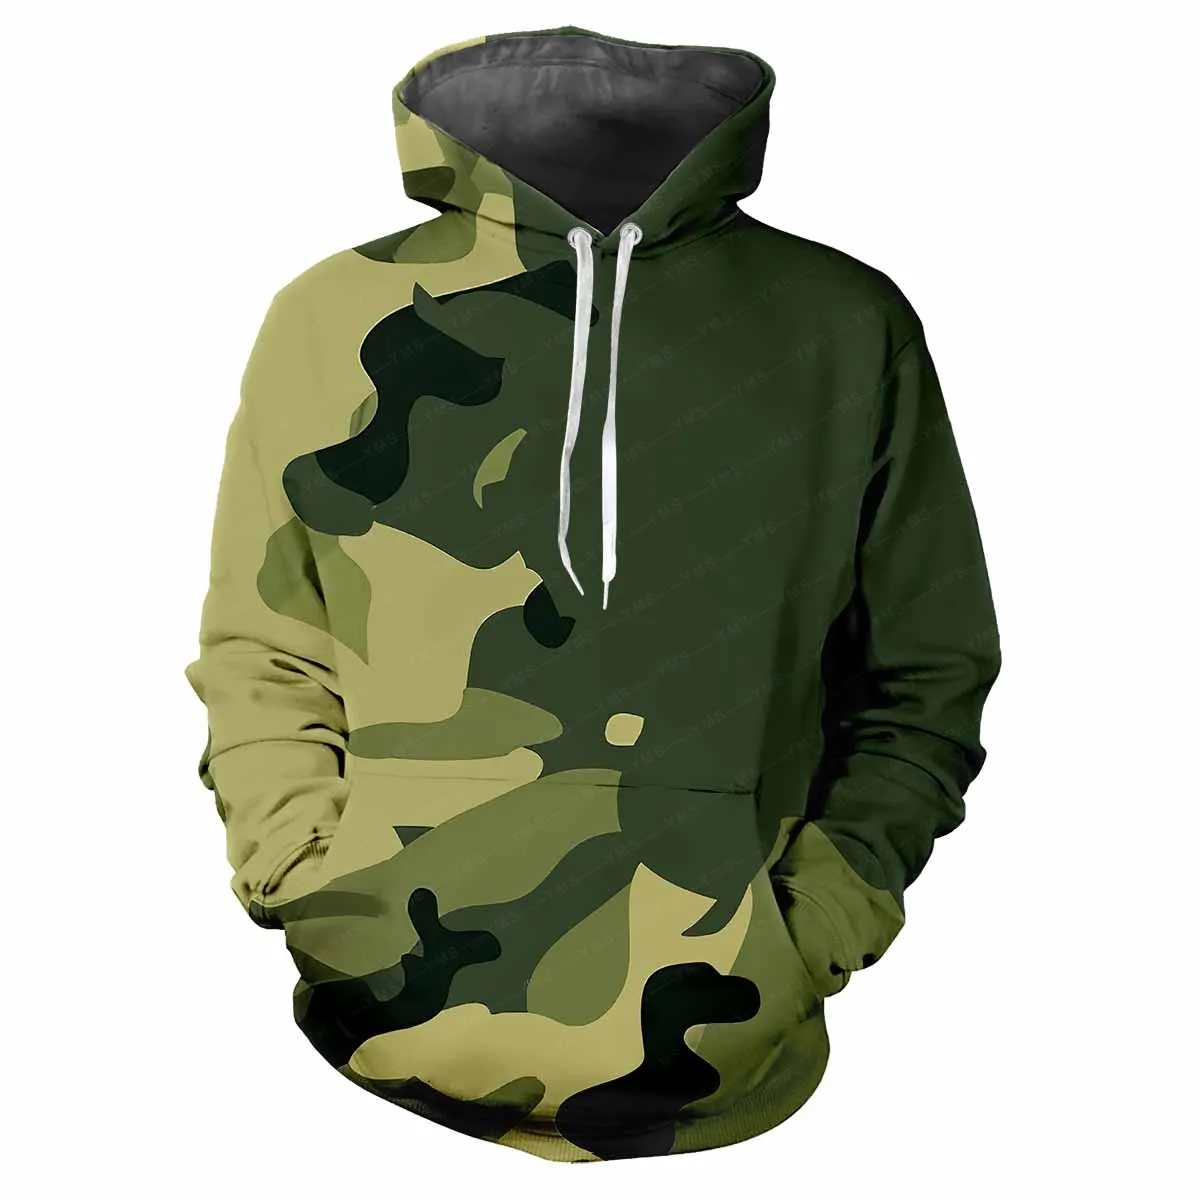 

Jungle Camouflage Camouflage 3d Printed Spring Fall Men's Hooded Hoodie Fashion Trend Tough Guy Clothing Loose Casual Clothing